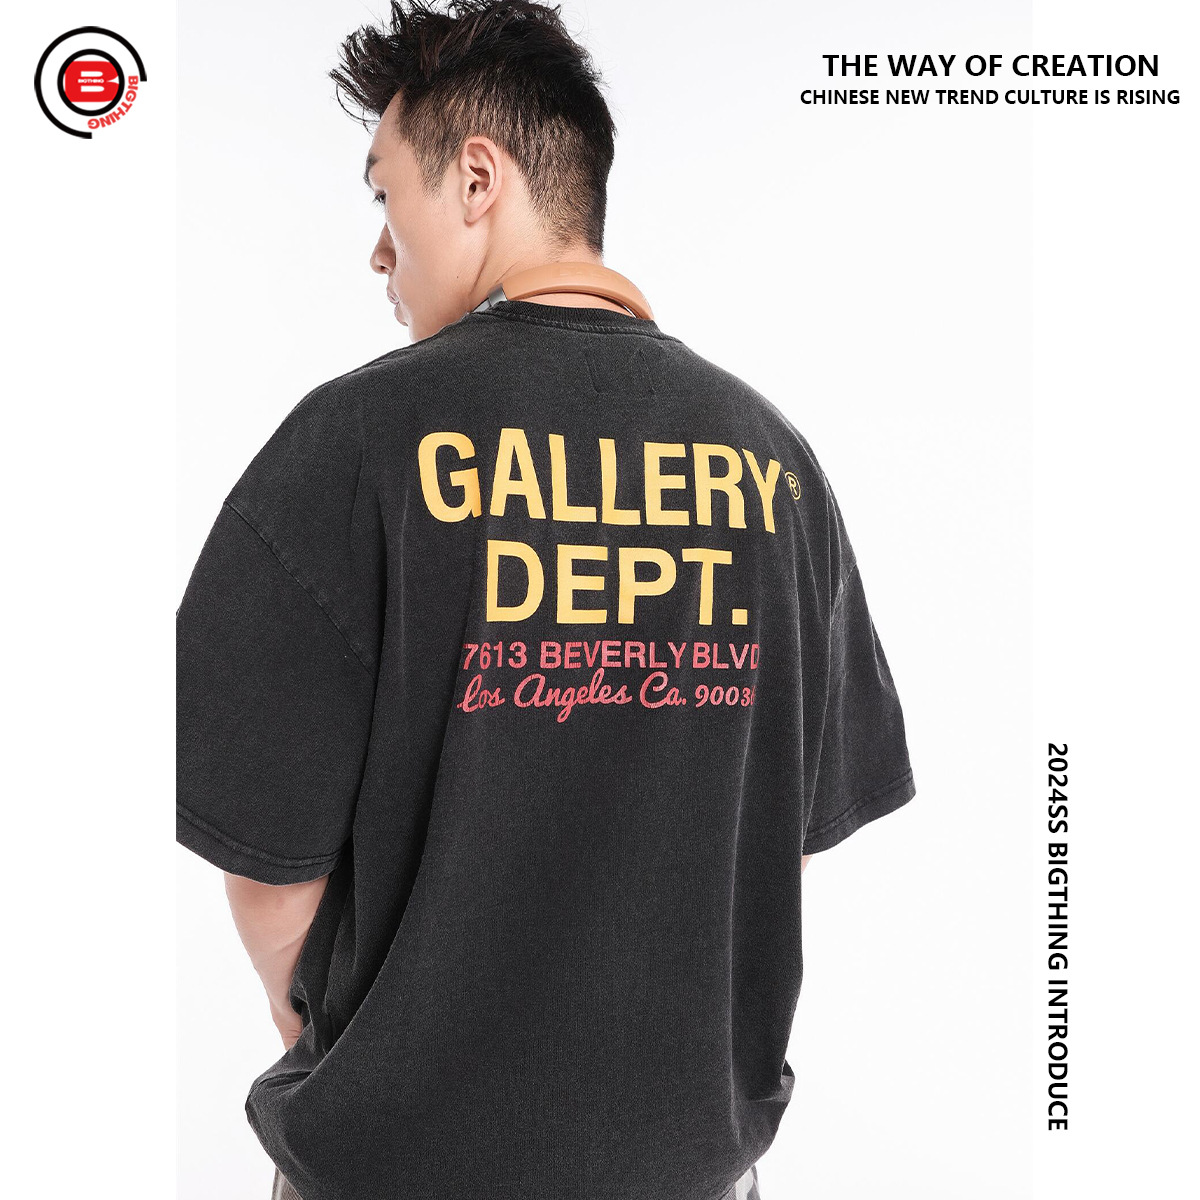 BIGTHING High Street Fashion Brand Printed CARSHOW Auto Exhibition GALLERY DEPT Washed Old Short Sleeve